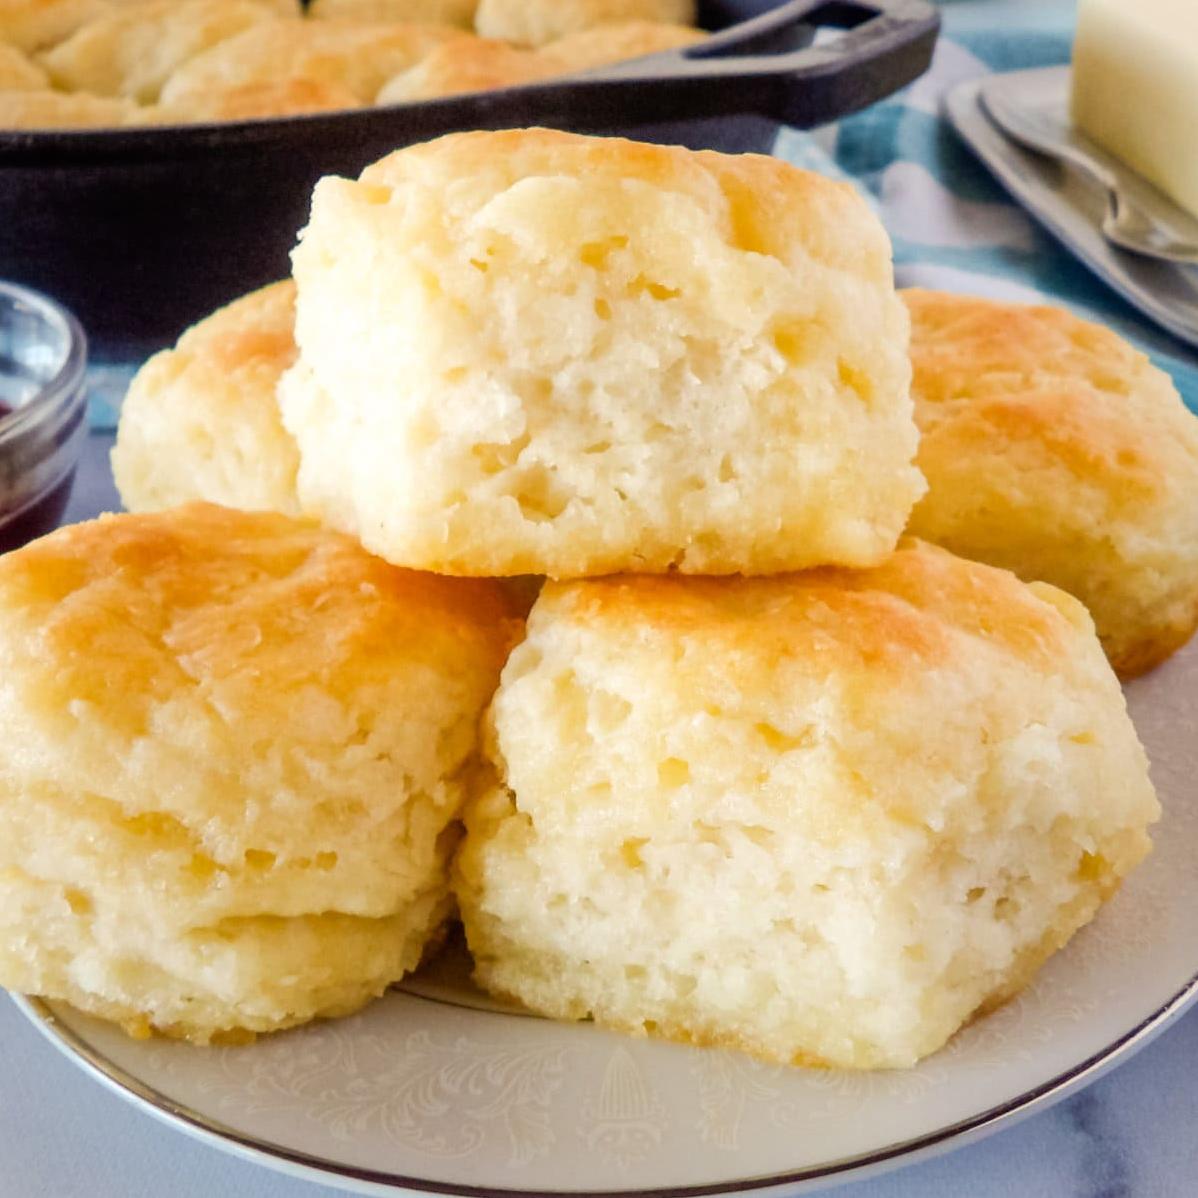  Who needs a muffin when you can have one of these delicious biscuits for breakfast?